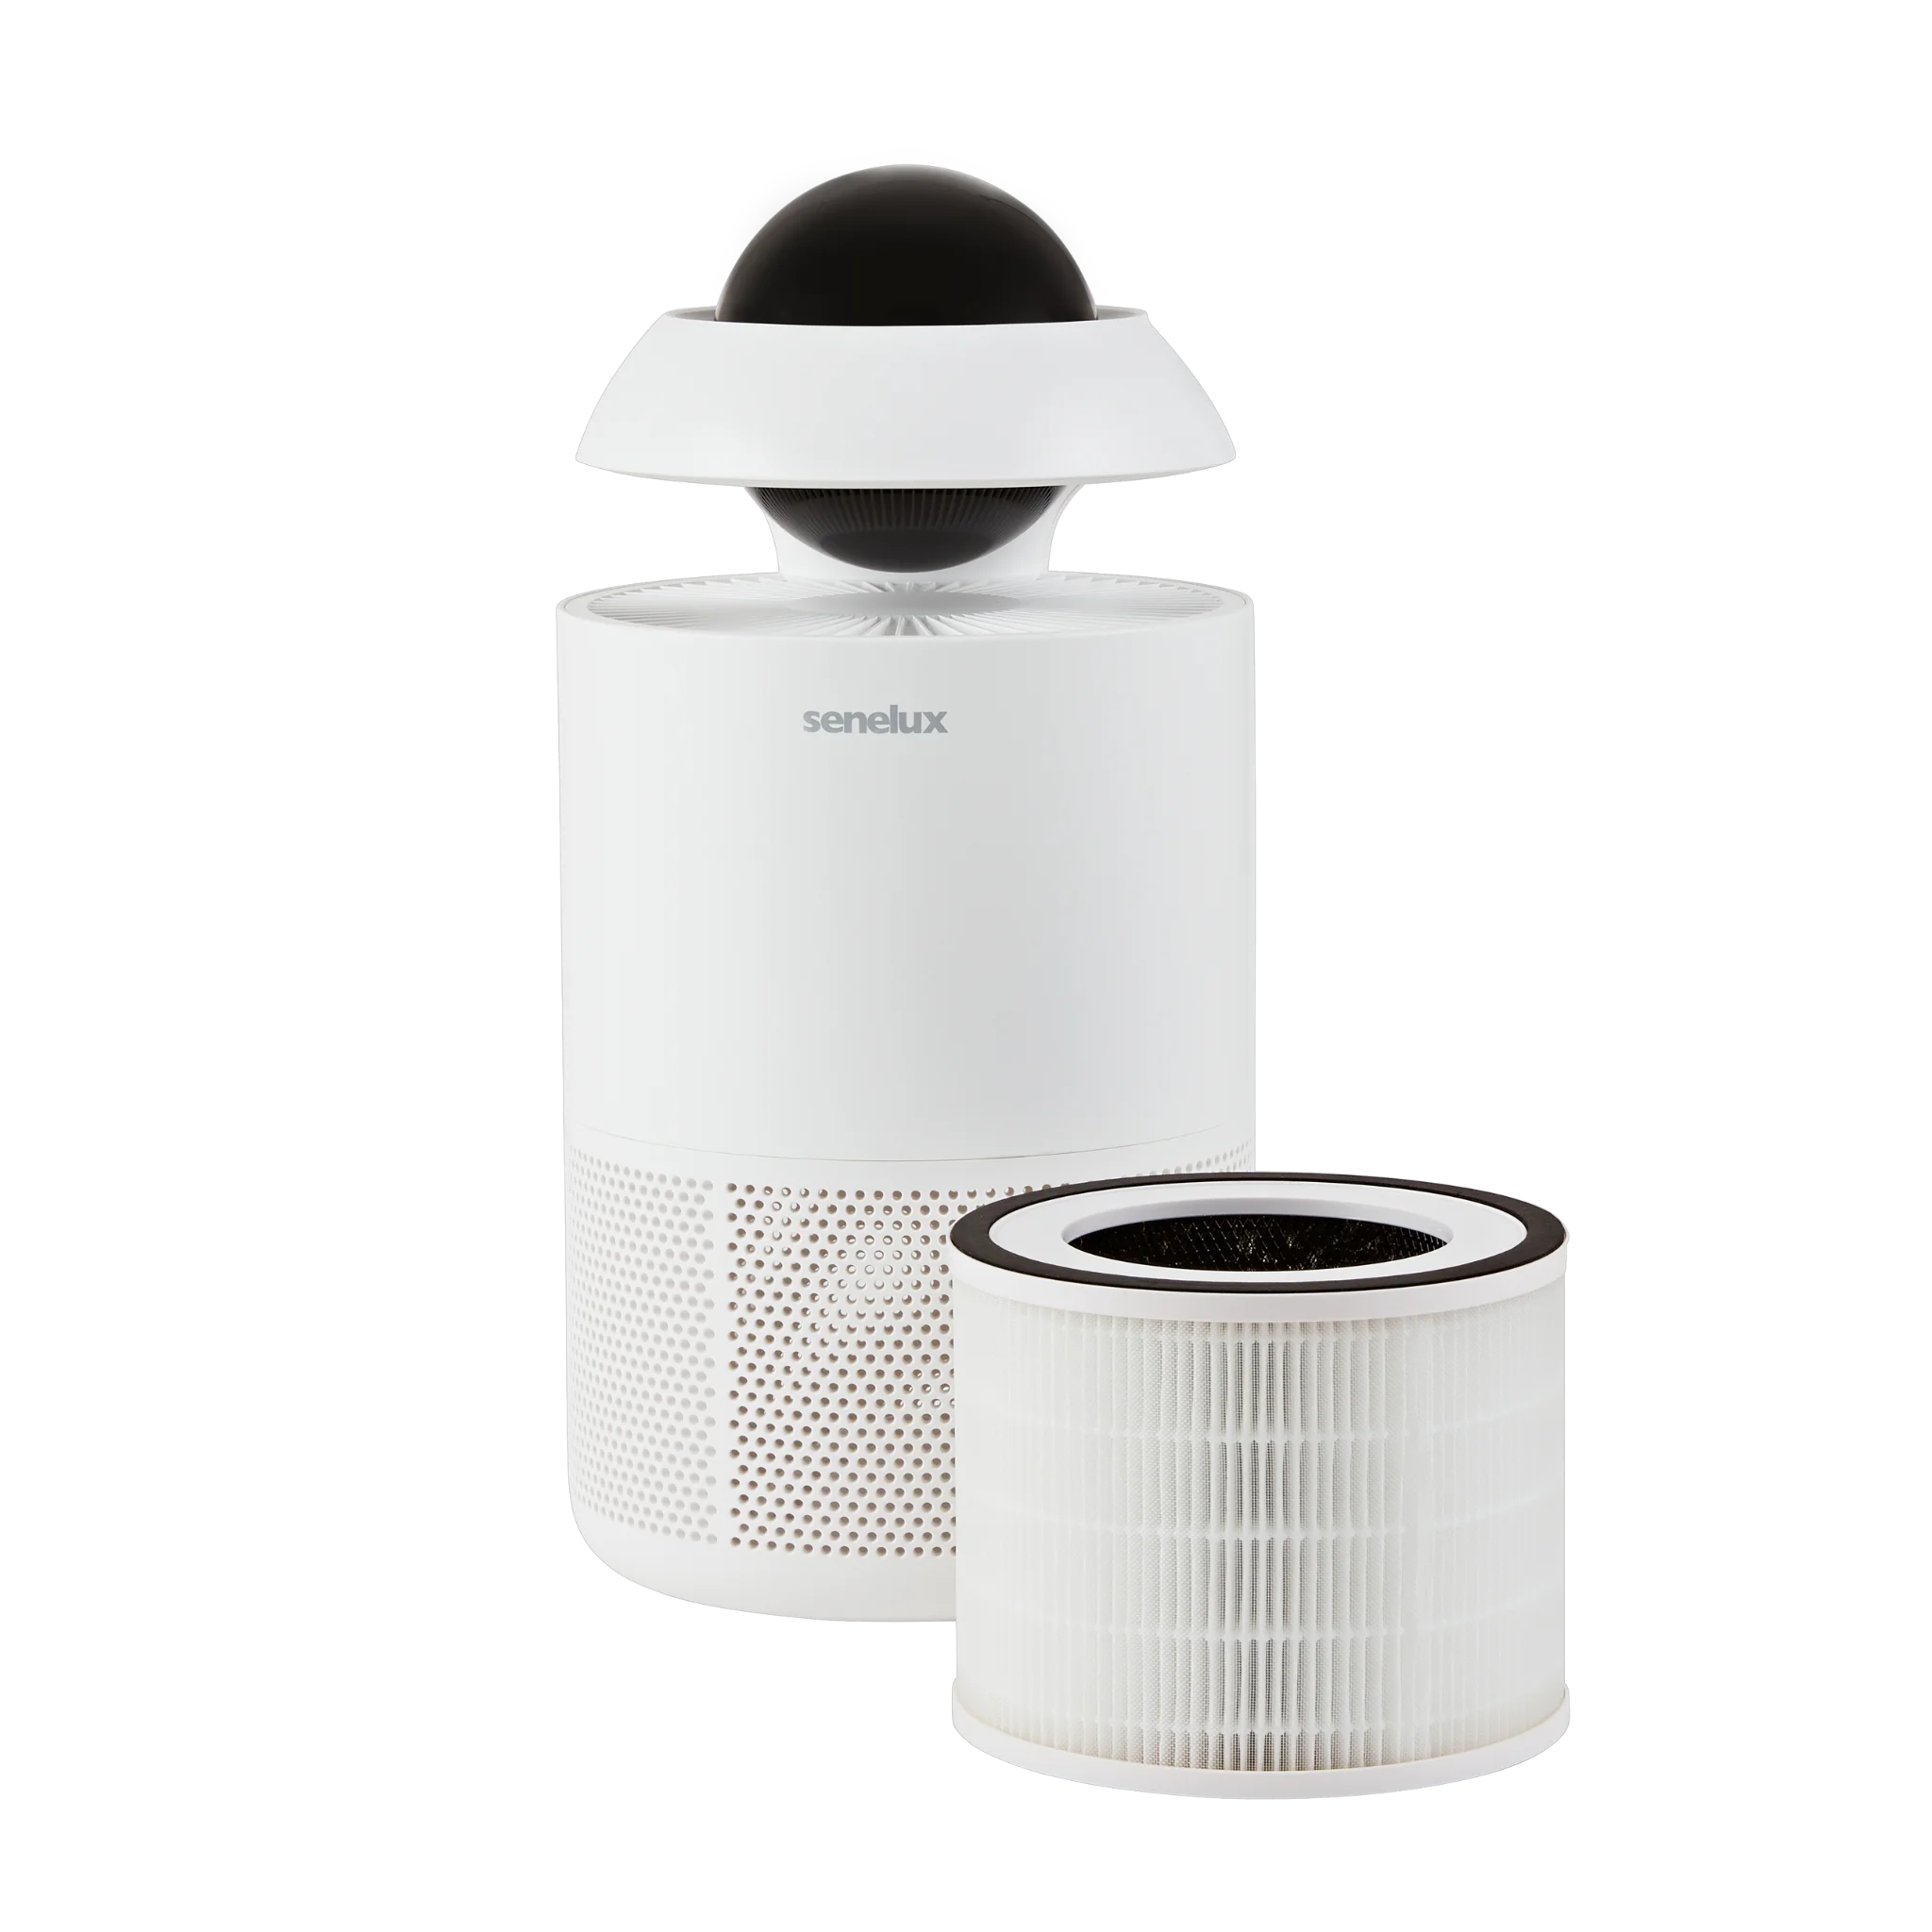 An image of the Senelux Jupiter Air Purifier with an advanced HEPA Air Purifier next to it.